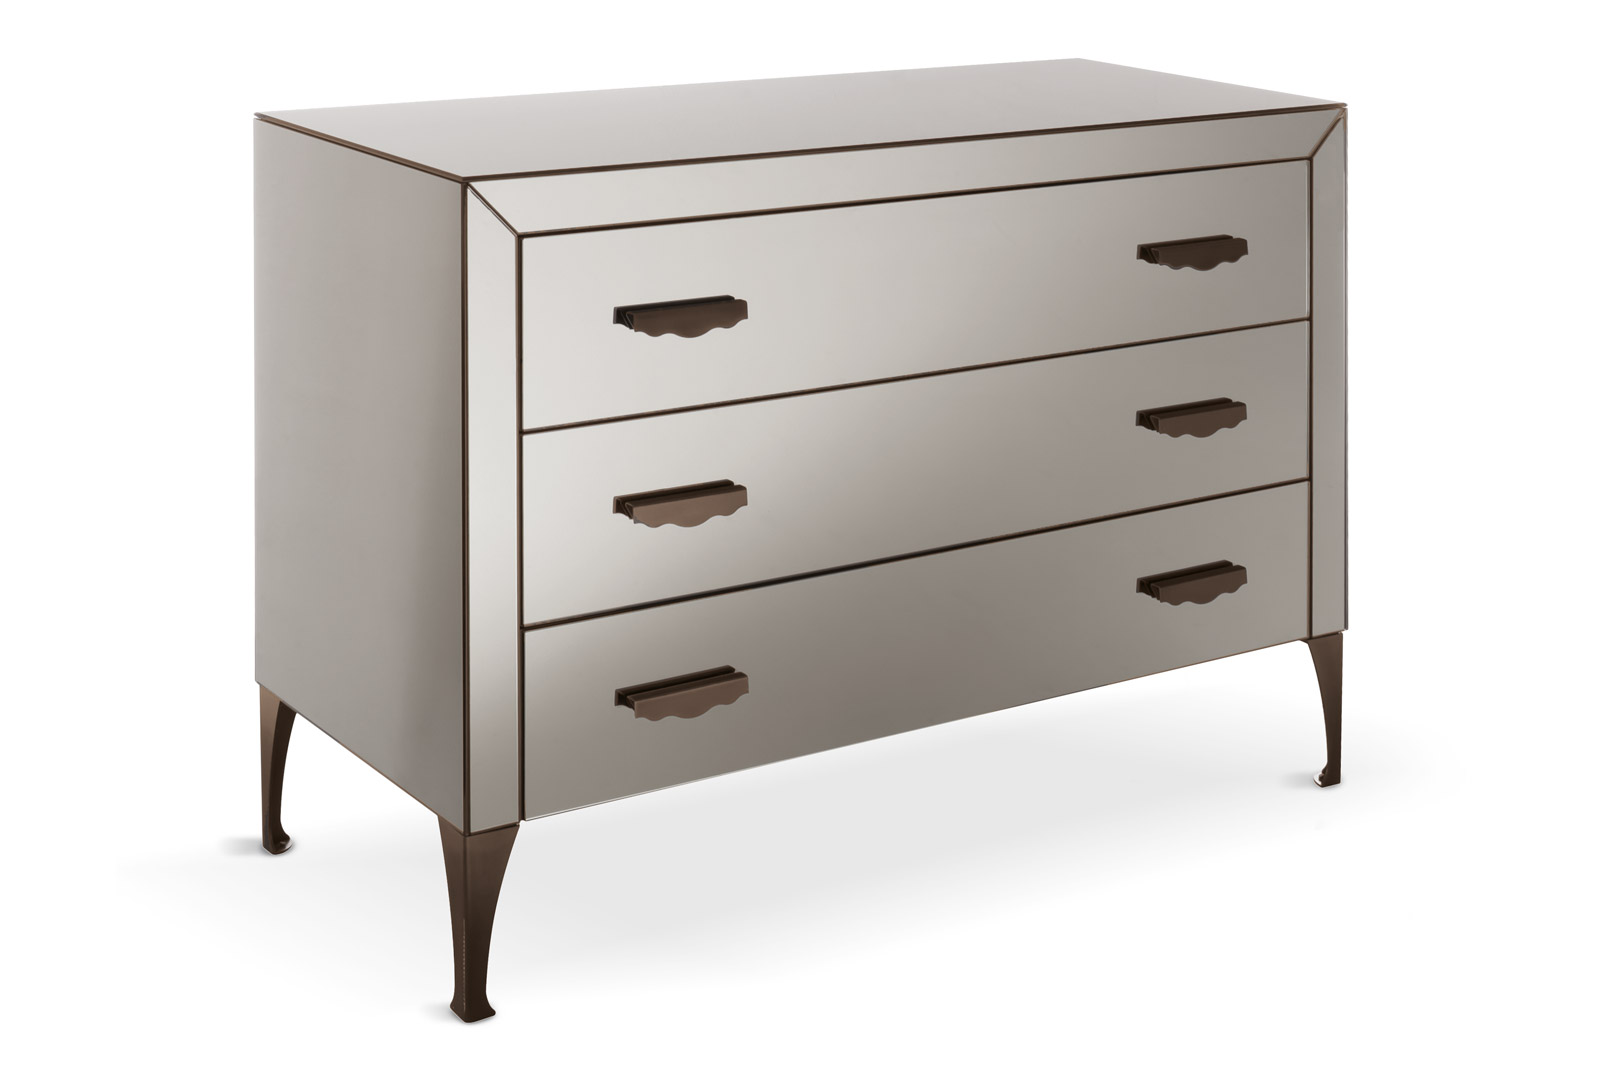 Adone chest of drawers - Cantori